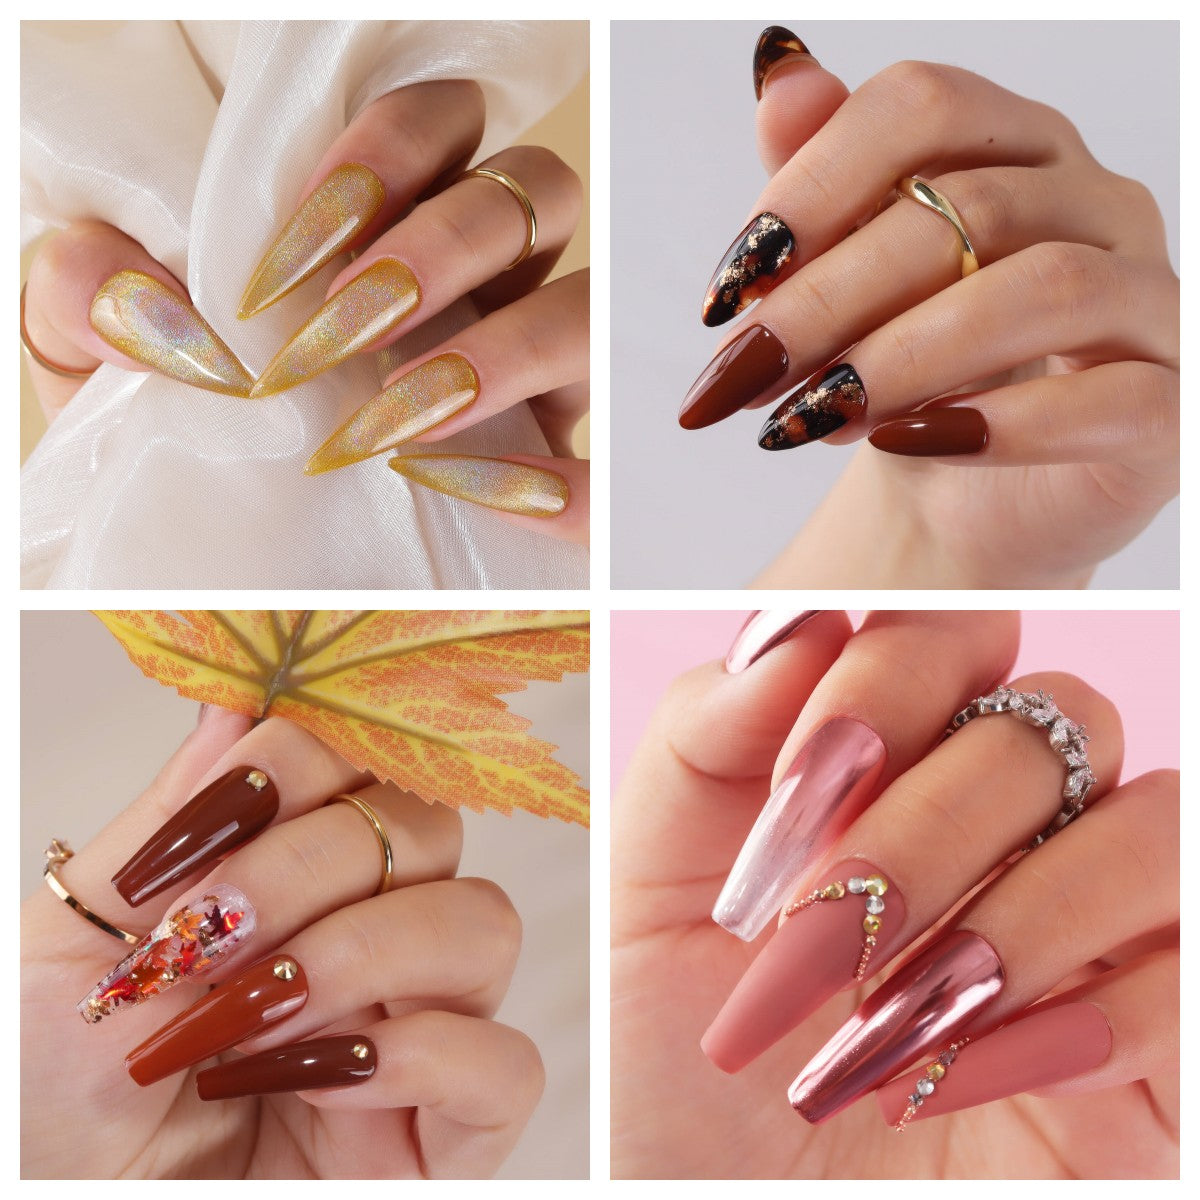 15 Gold Foil Manicure Ideas That Will Take Your Nails to the Next